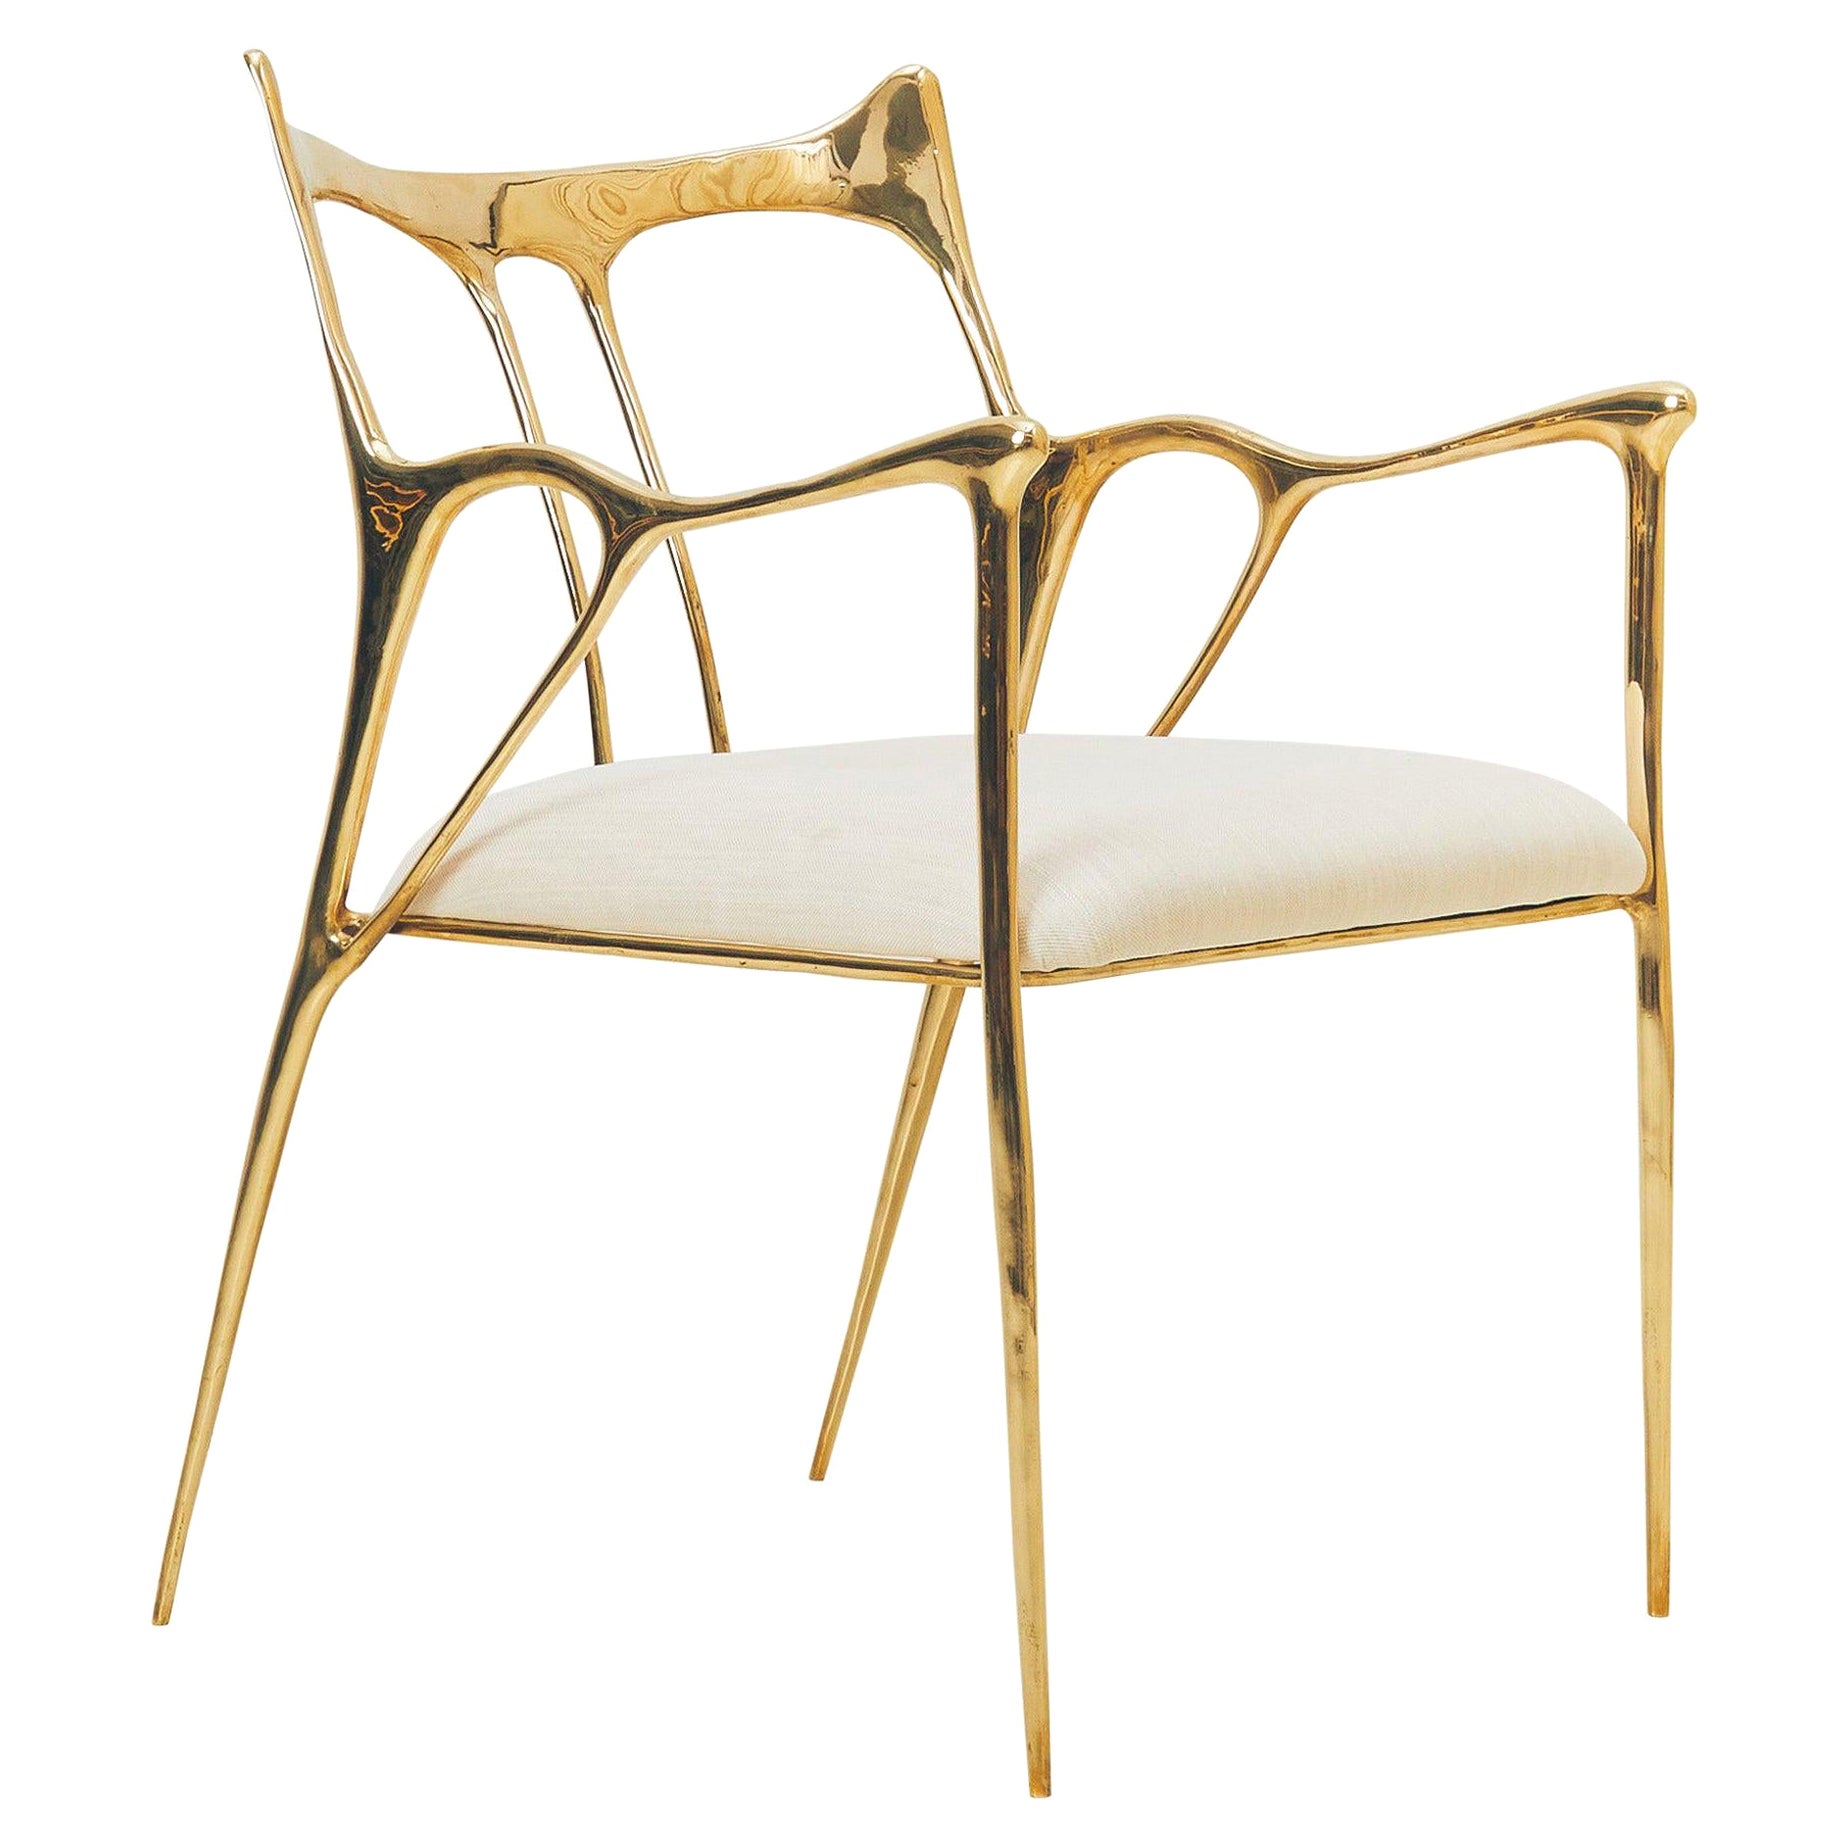 Calligraphic Sculpted Brass Chair by Misaya